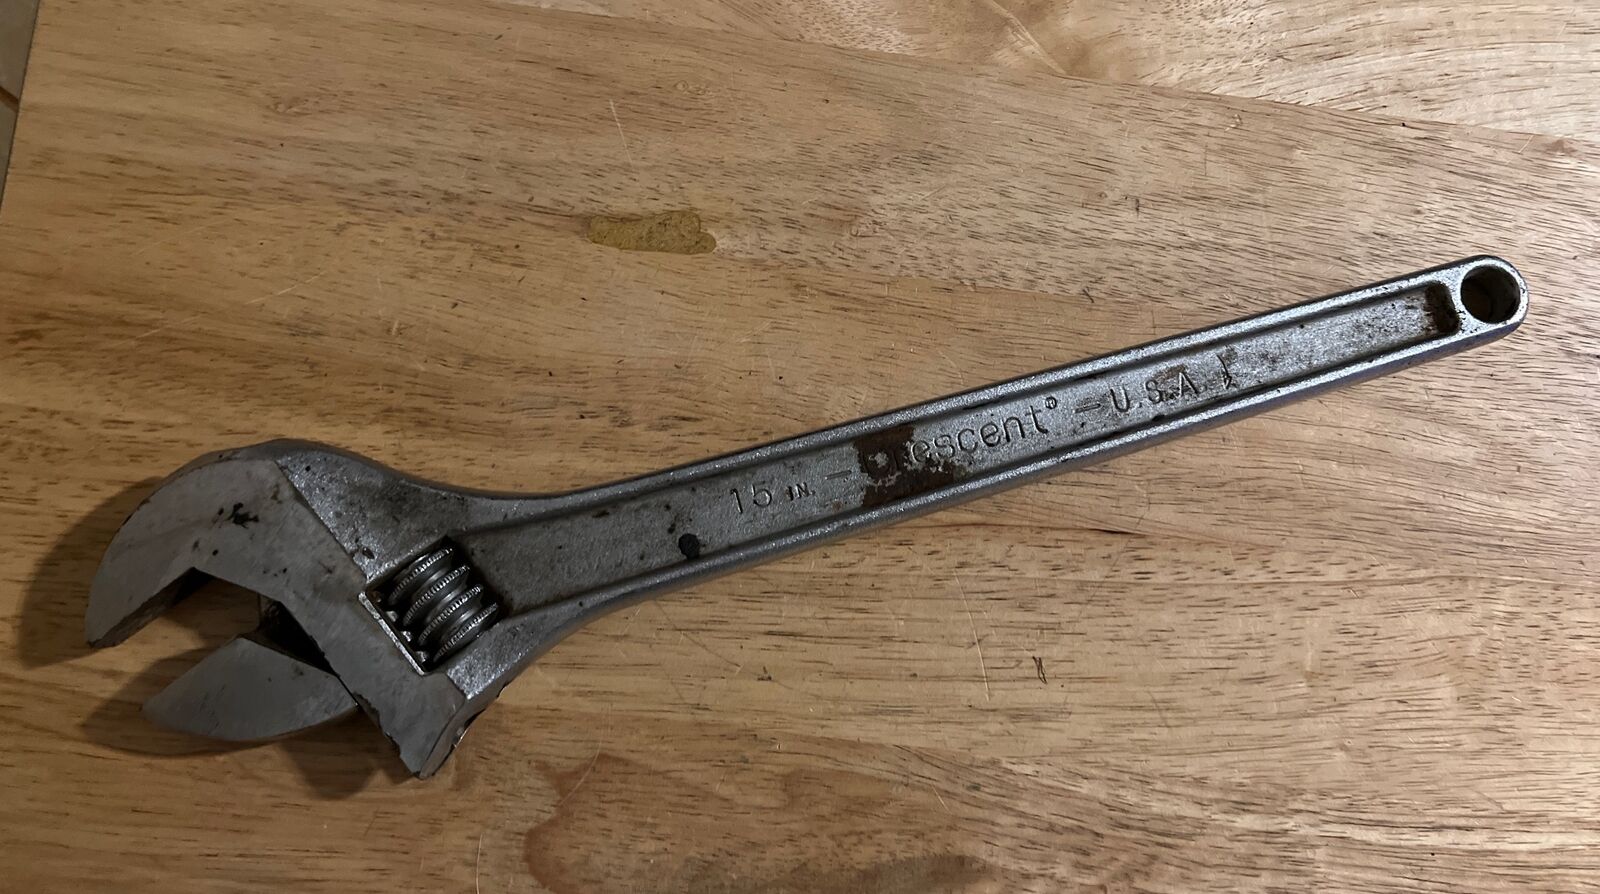 Vintage 15 Inch Adjustable Wrench Crescent The Original Since 1907 USA